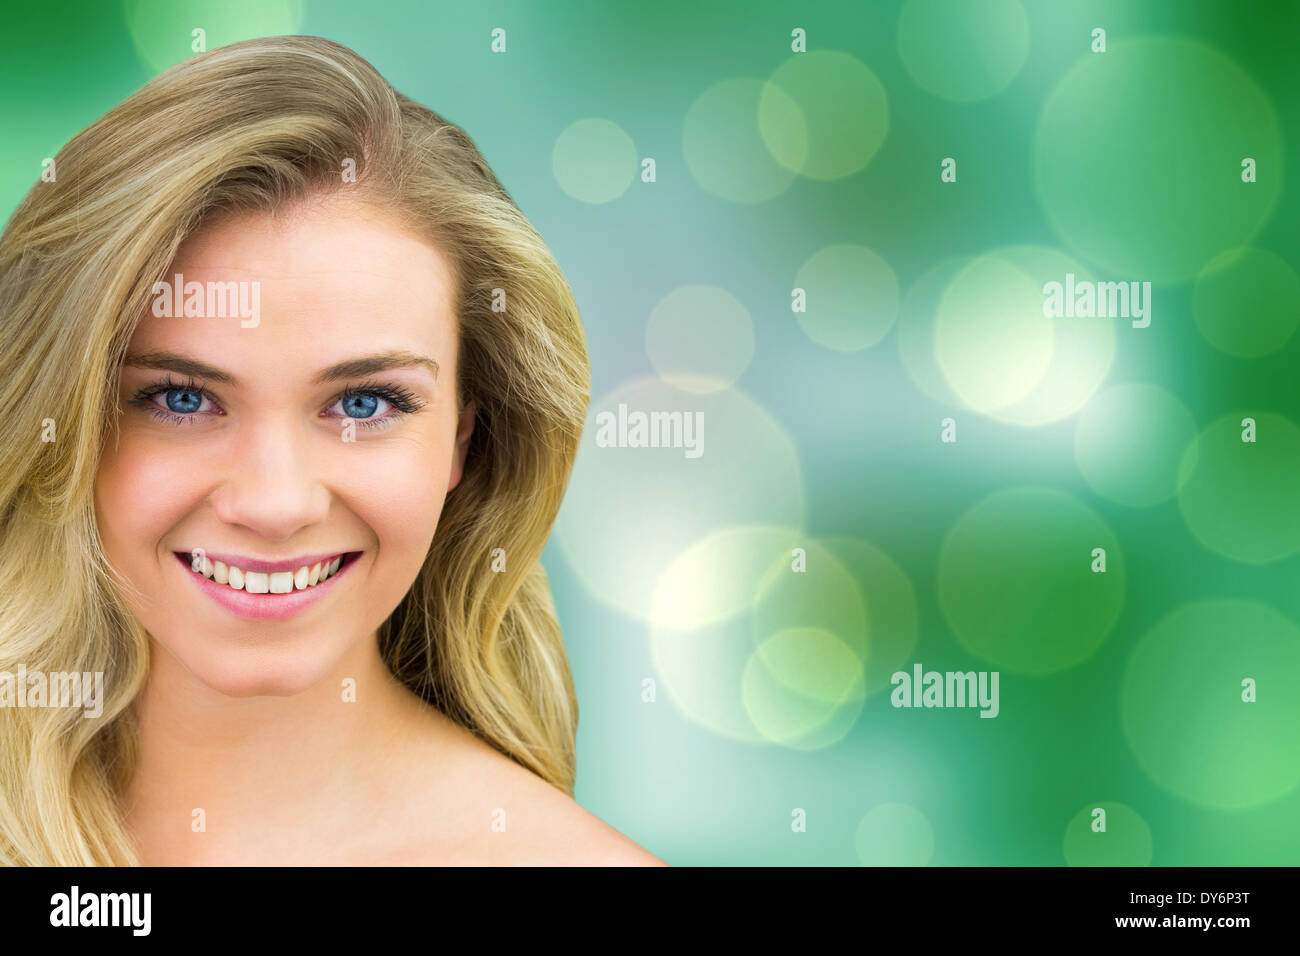 Composite image of smiling blonde natural beauty Stock Photo